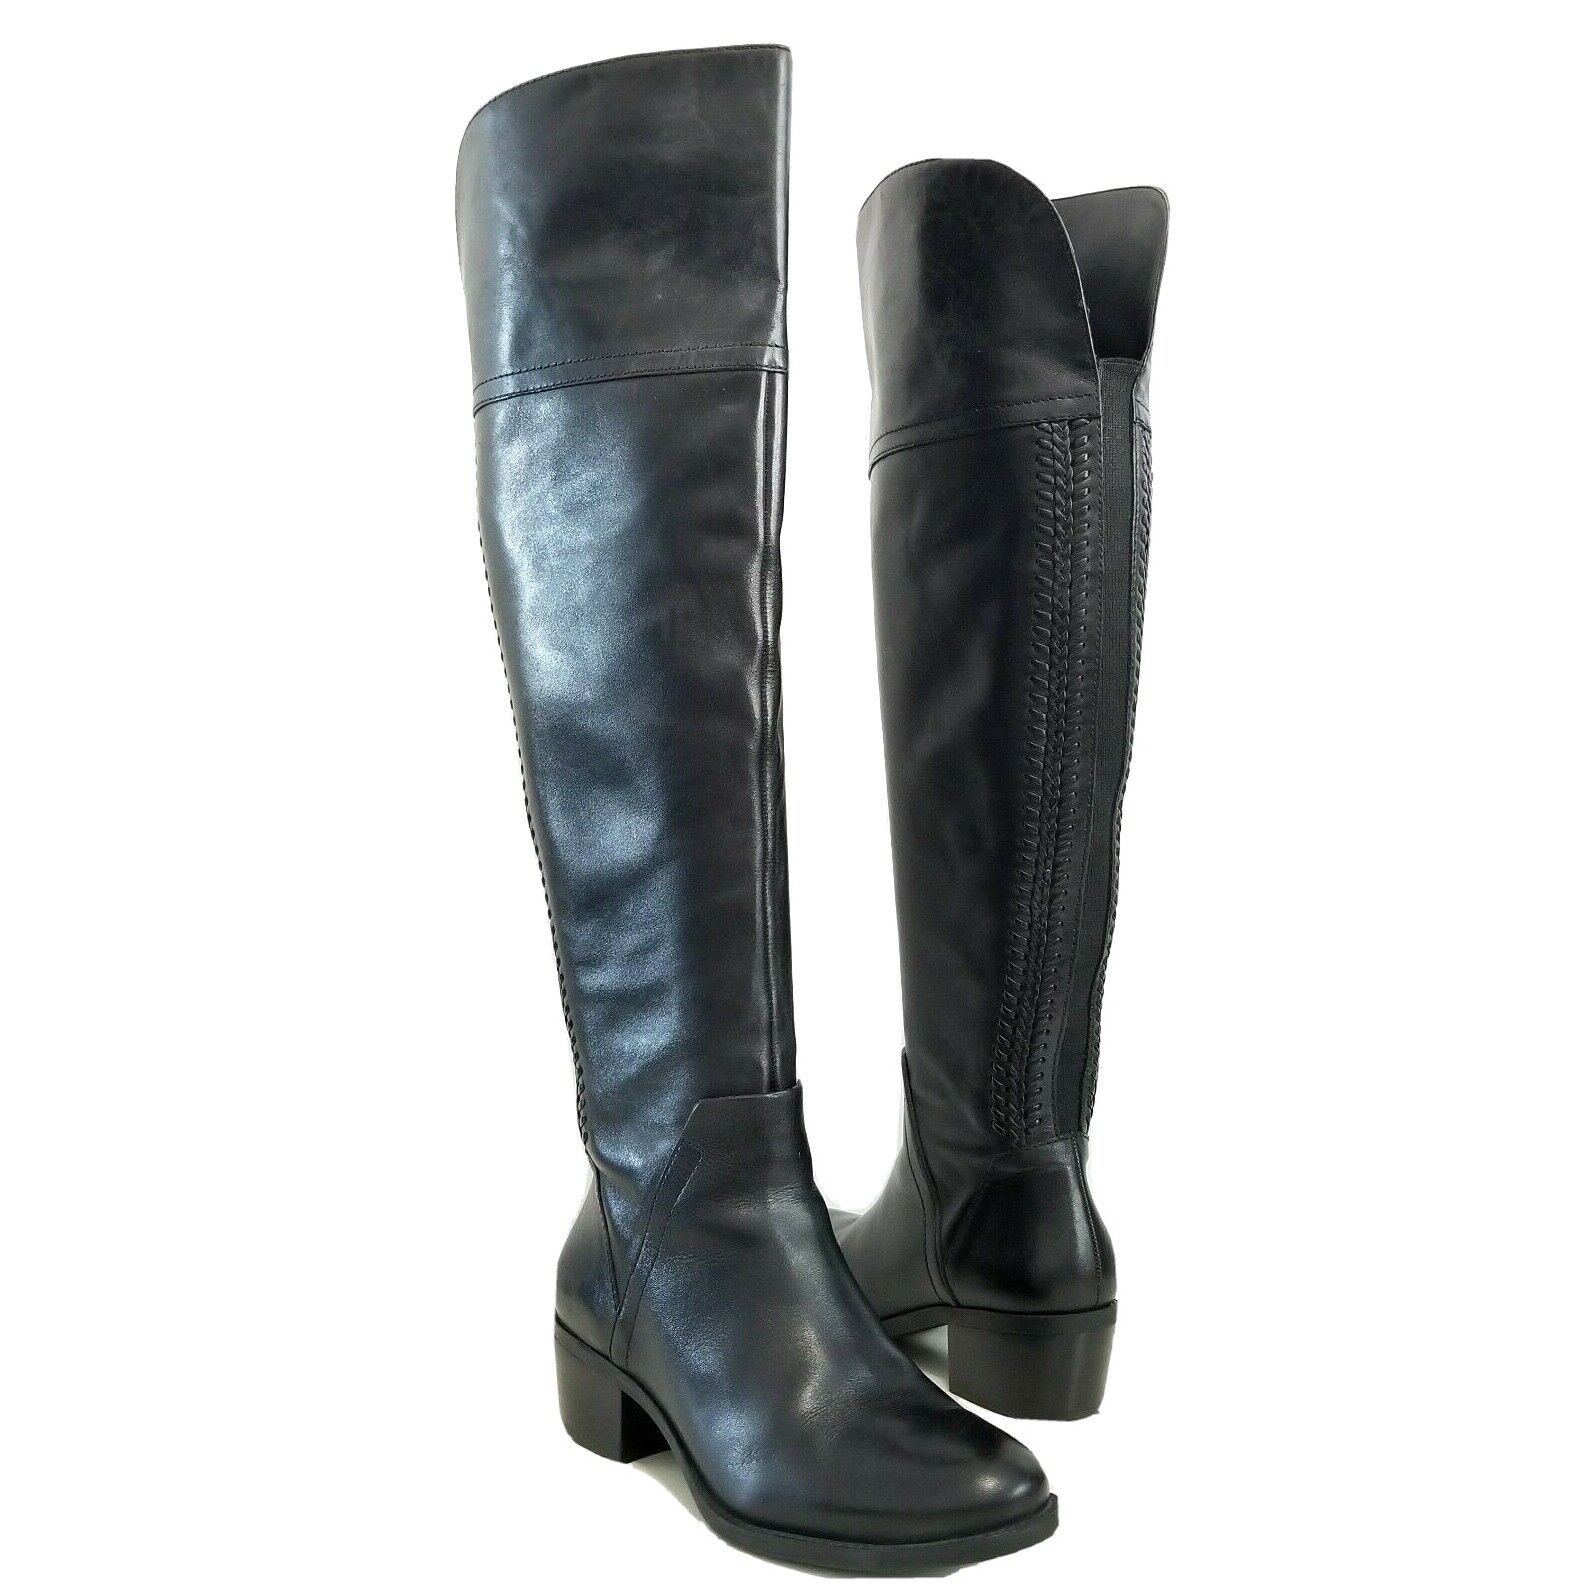 Vince Camuto Bendra Riding Boots Tall Riding Blac… - image 1